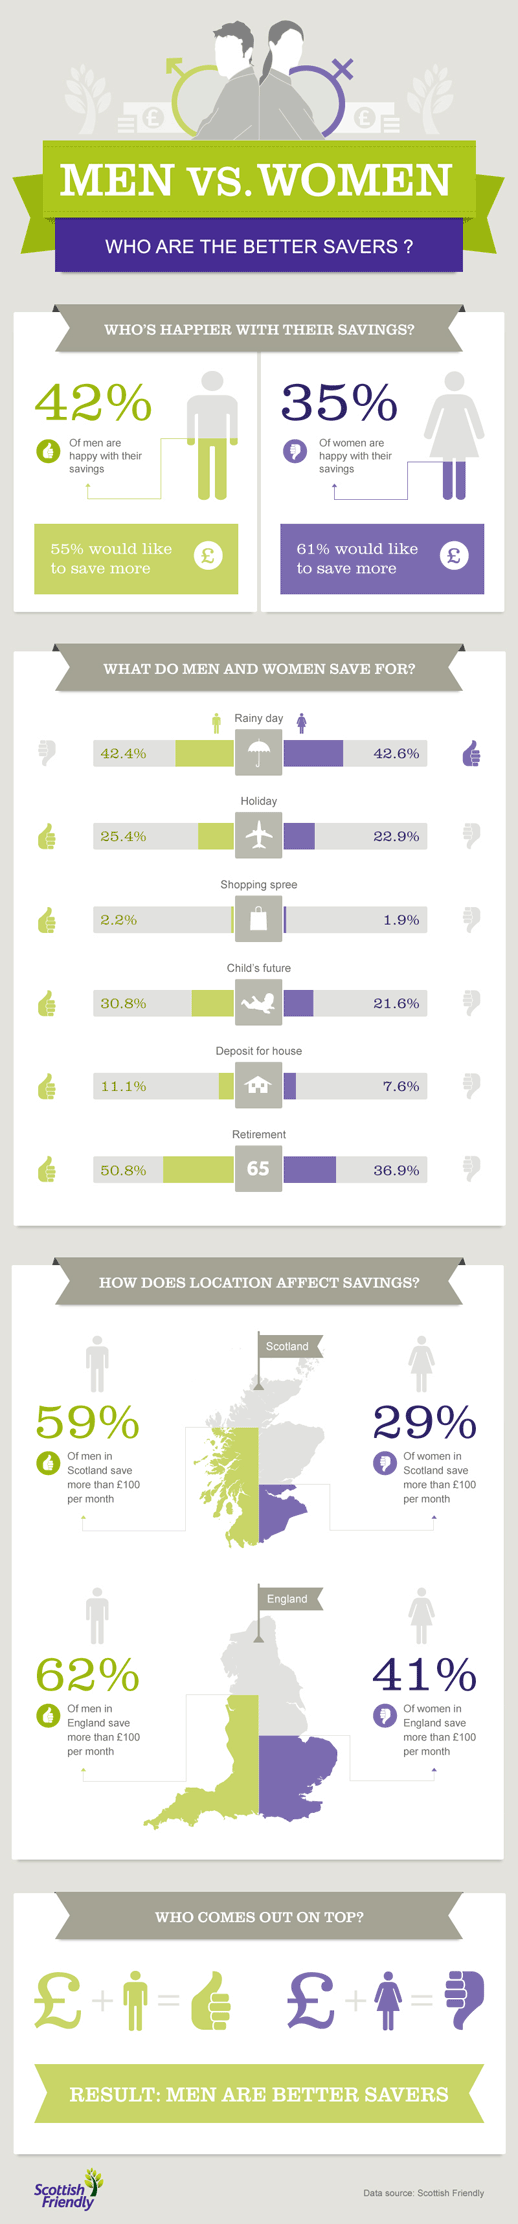 Men vs Women: Who Are The Better Savers? Infographic